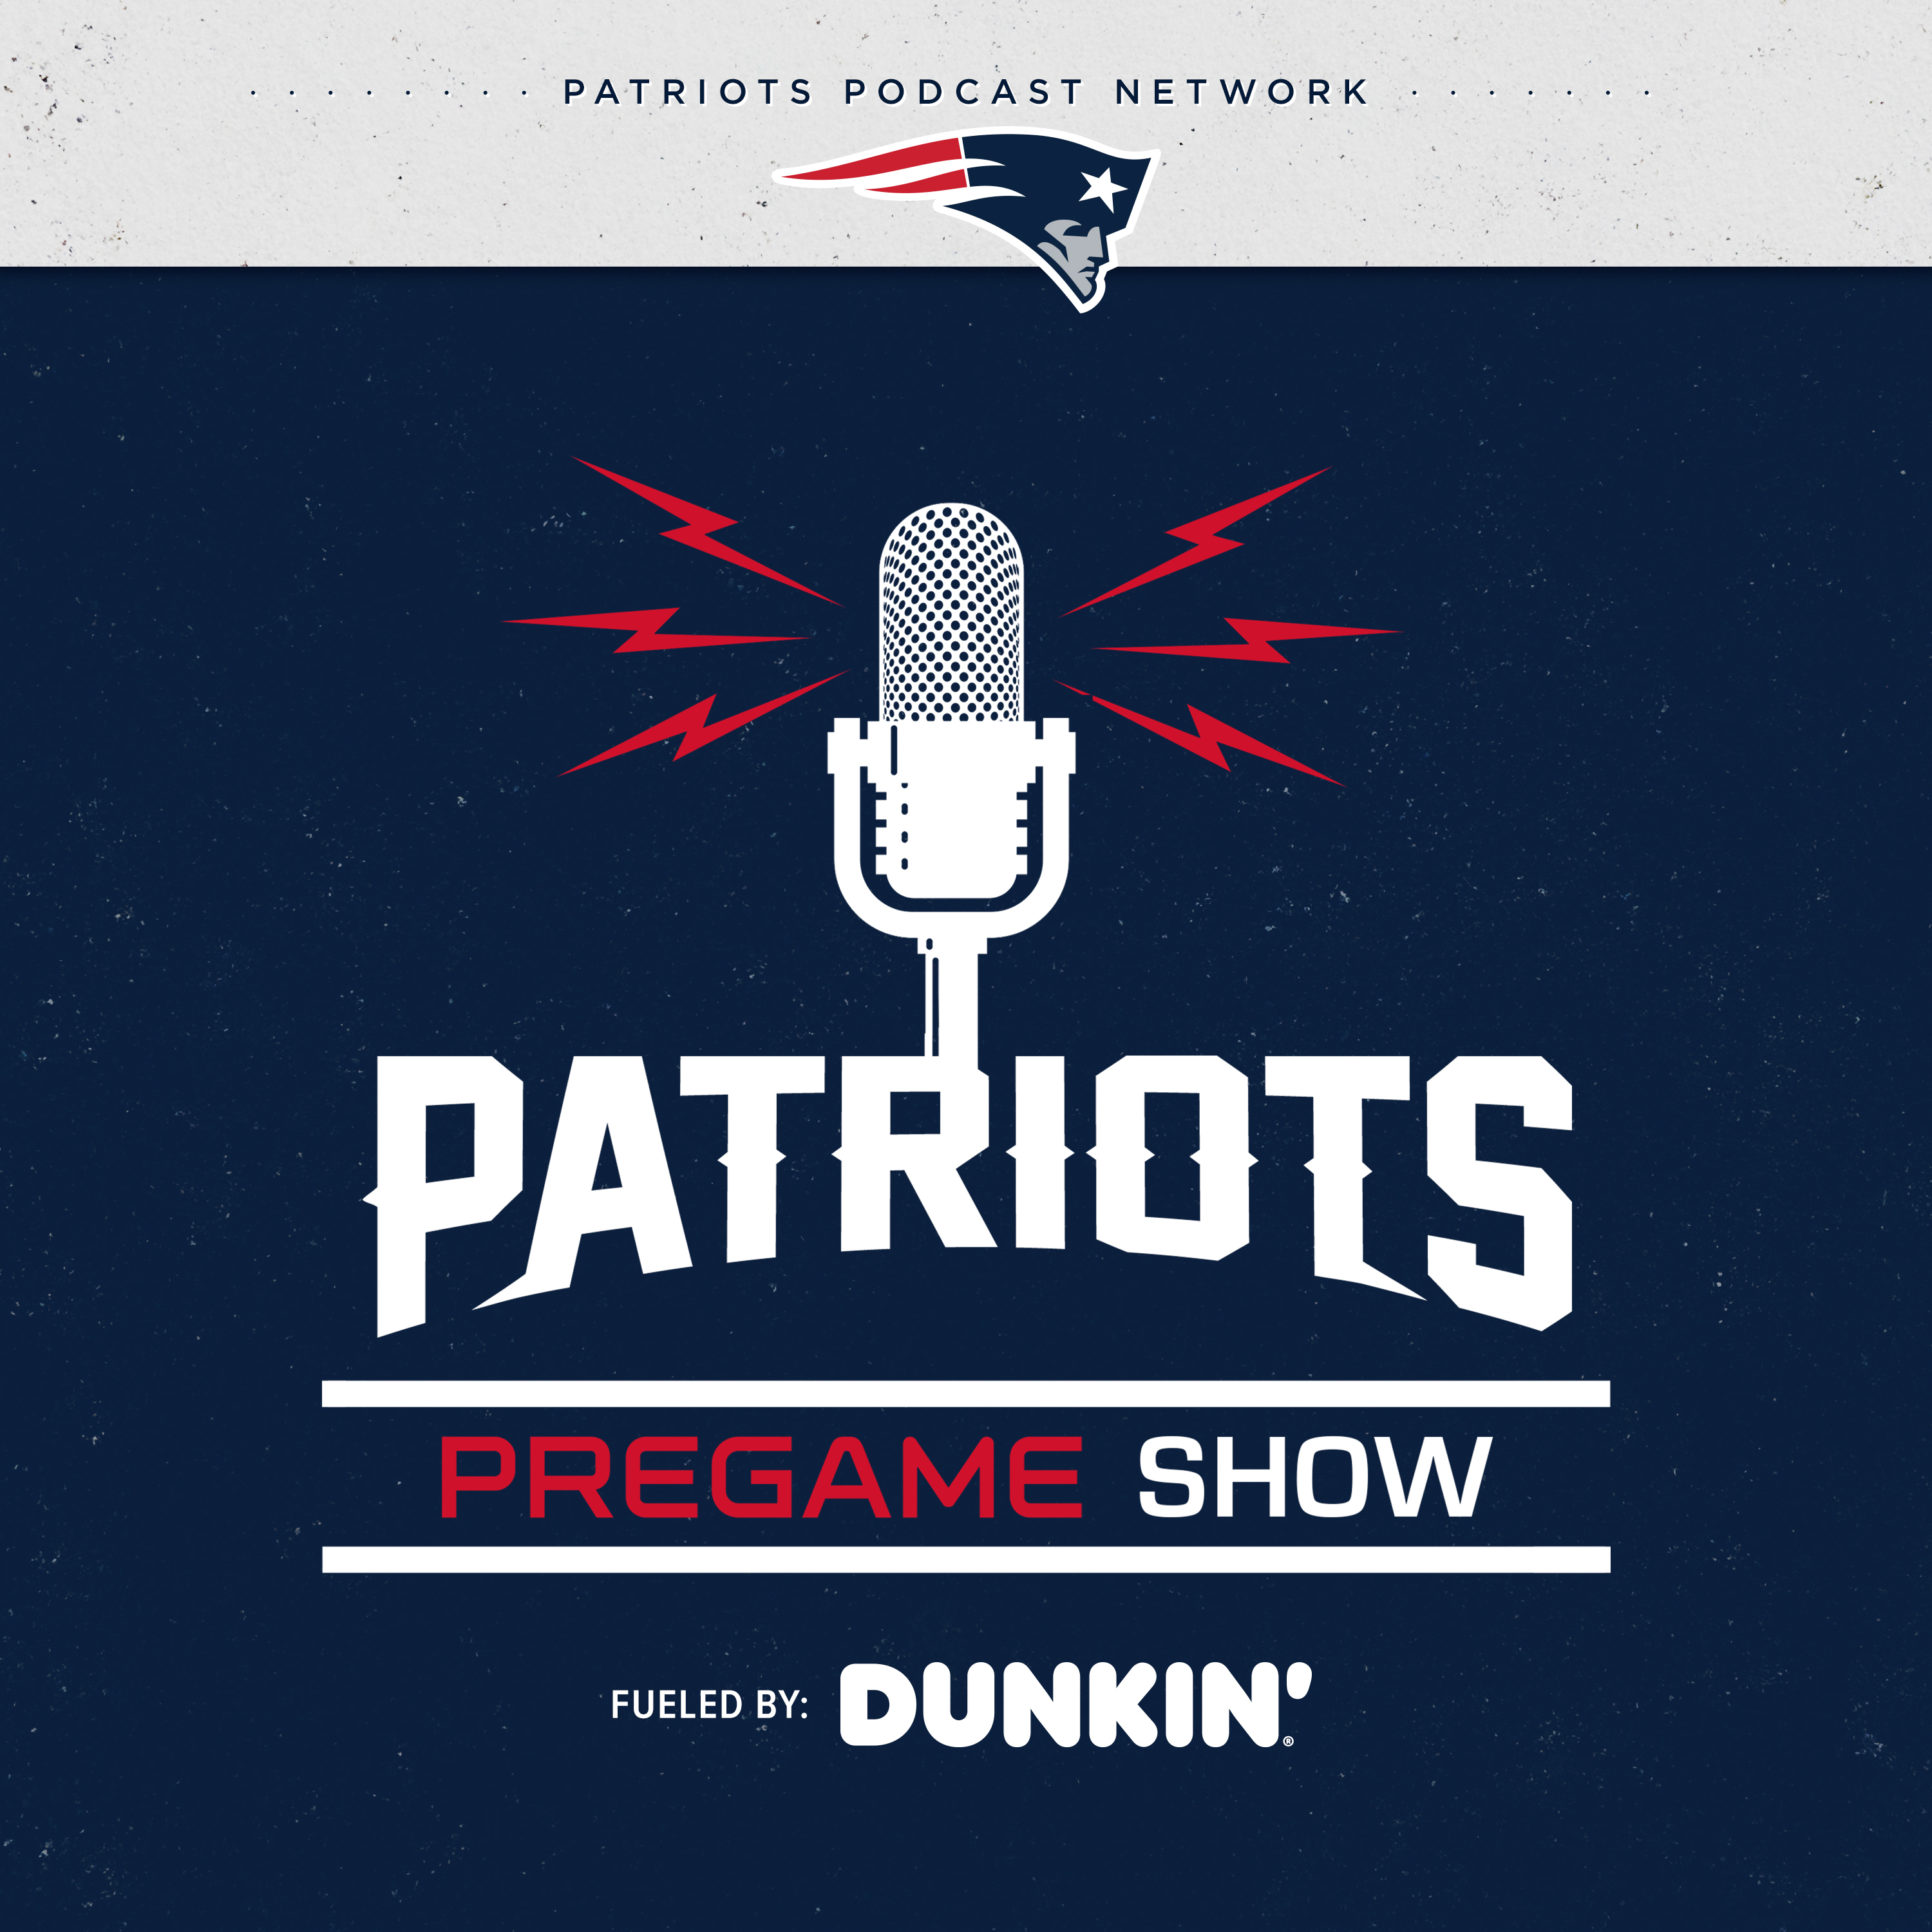 Patriots Pregame Show 12/3: Chargers Preview, Zappe Time?, Inactives Analysis